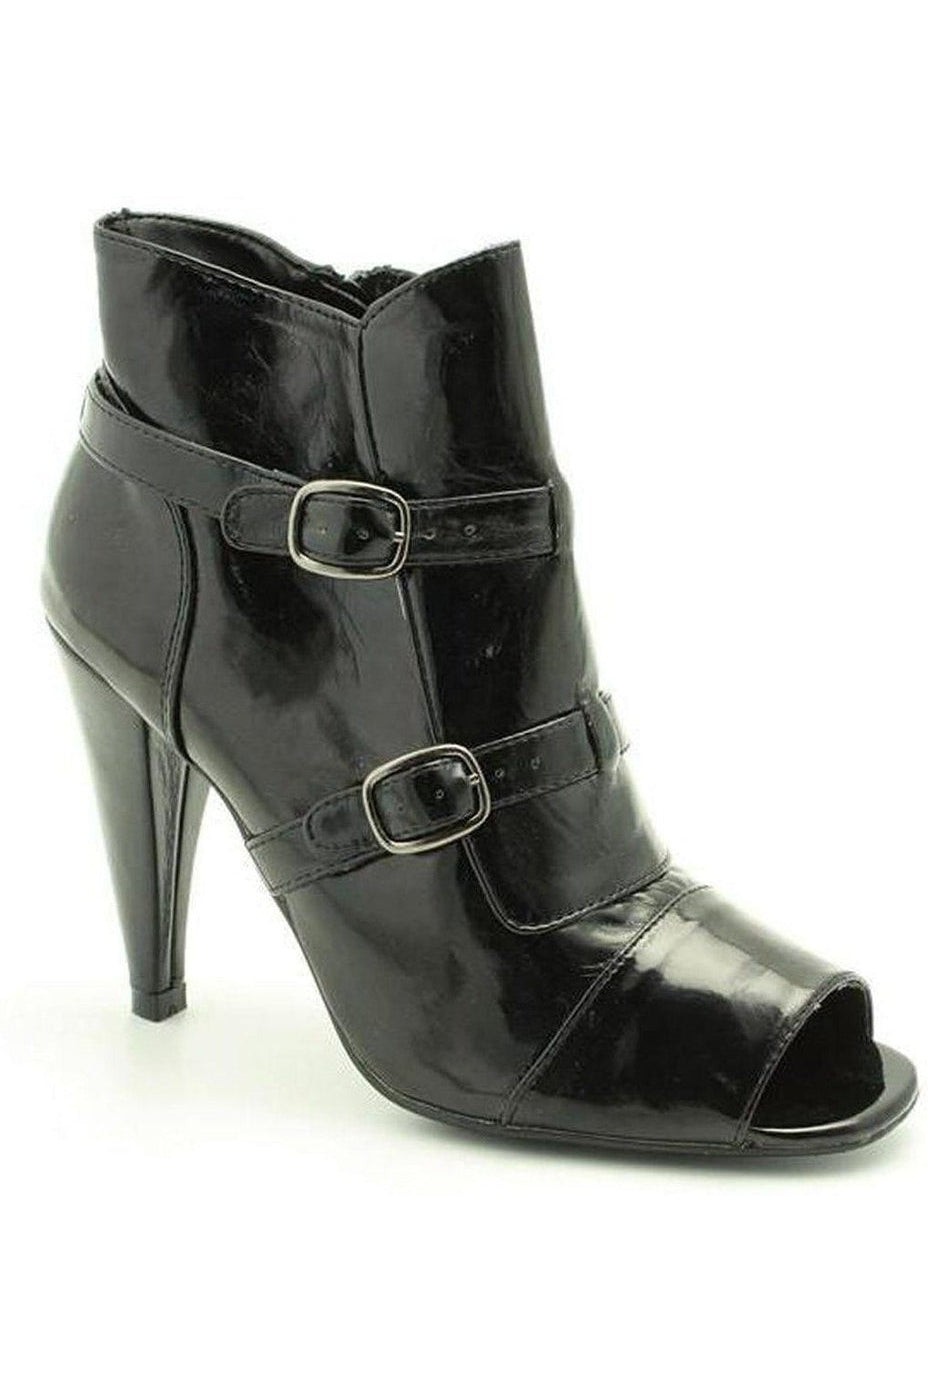 Open Toe Shoe Boot-Black-Sexyshoes Brand-Black-Ankle Boots-SEXYSHOES.COM